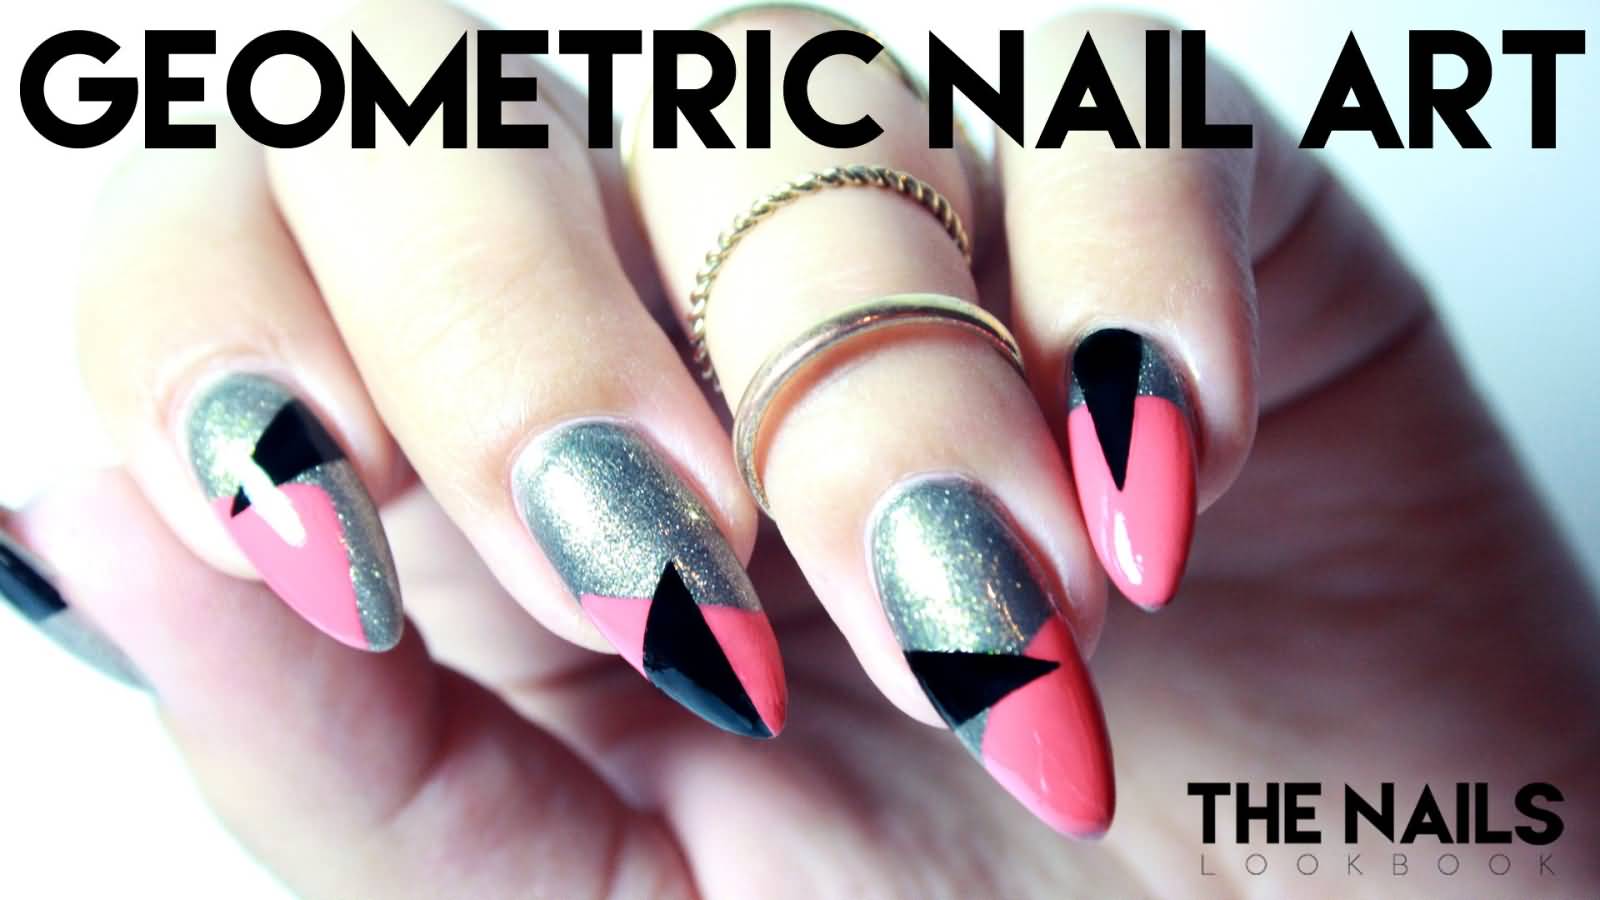 2. Geometric Nail Art with Lines and Dots - wide 6